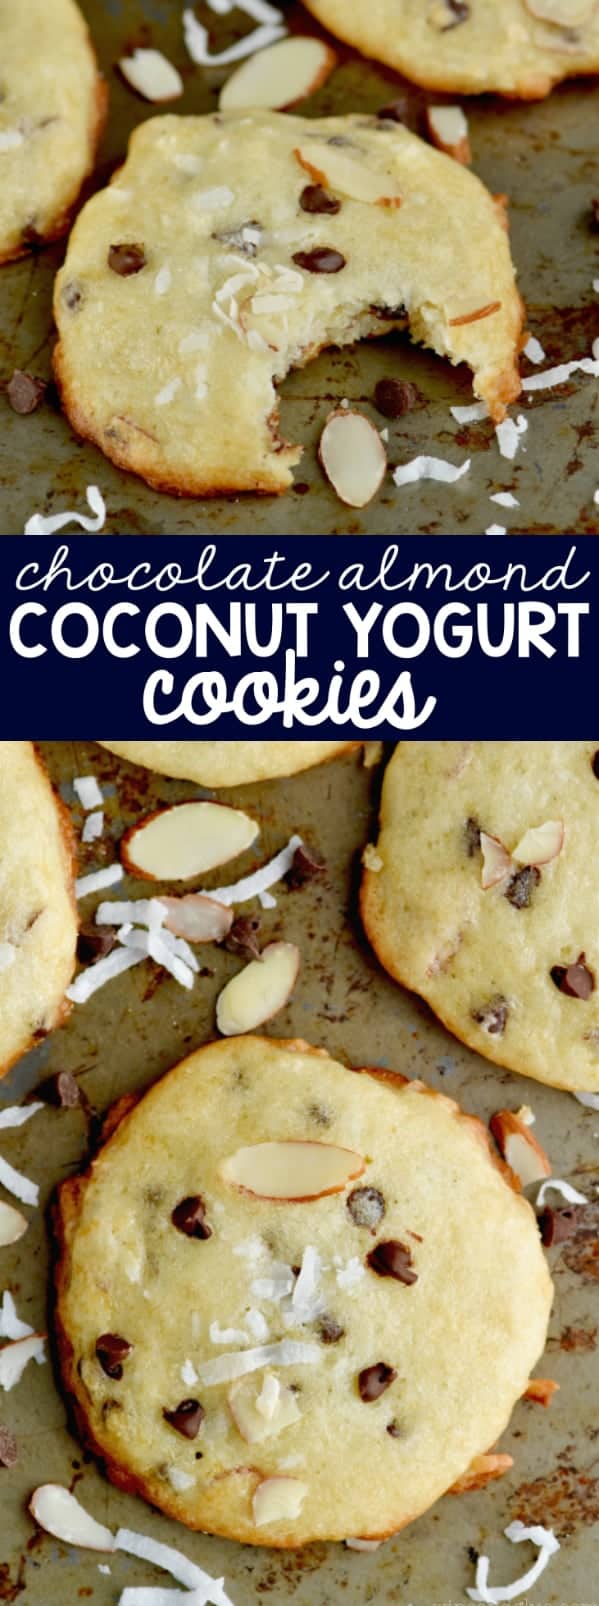 A photo of the Chocolate Almond Coconut Yogurt Cookies that have a golden brown color. 